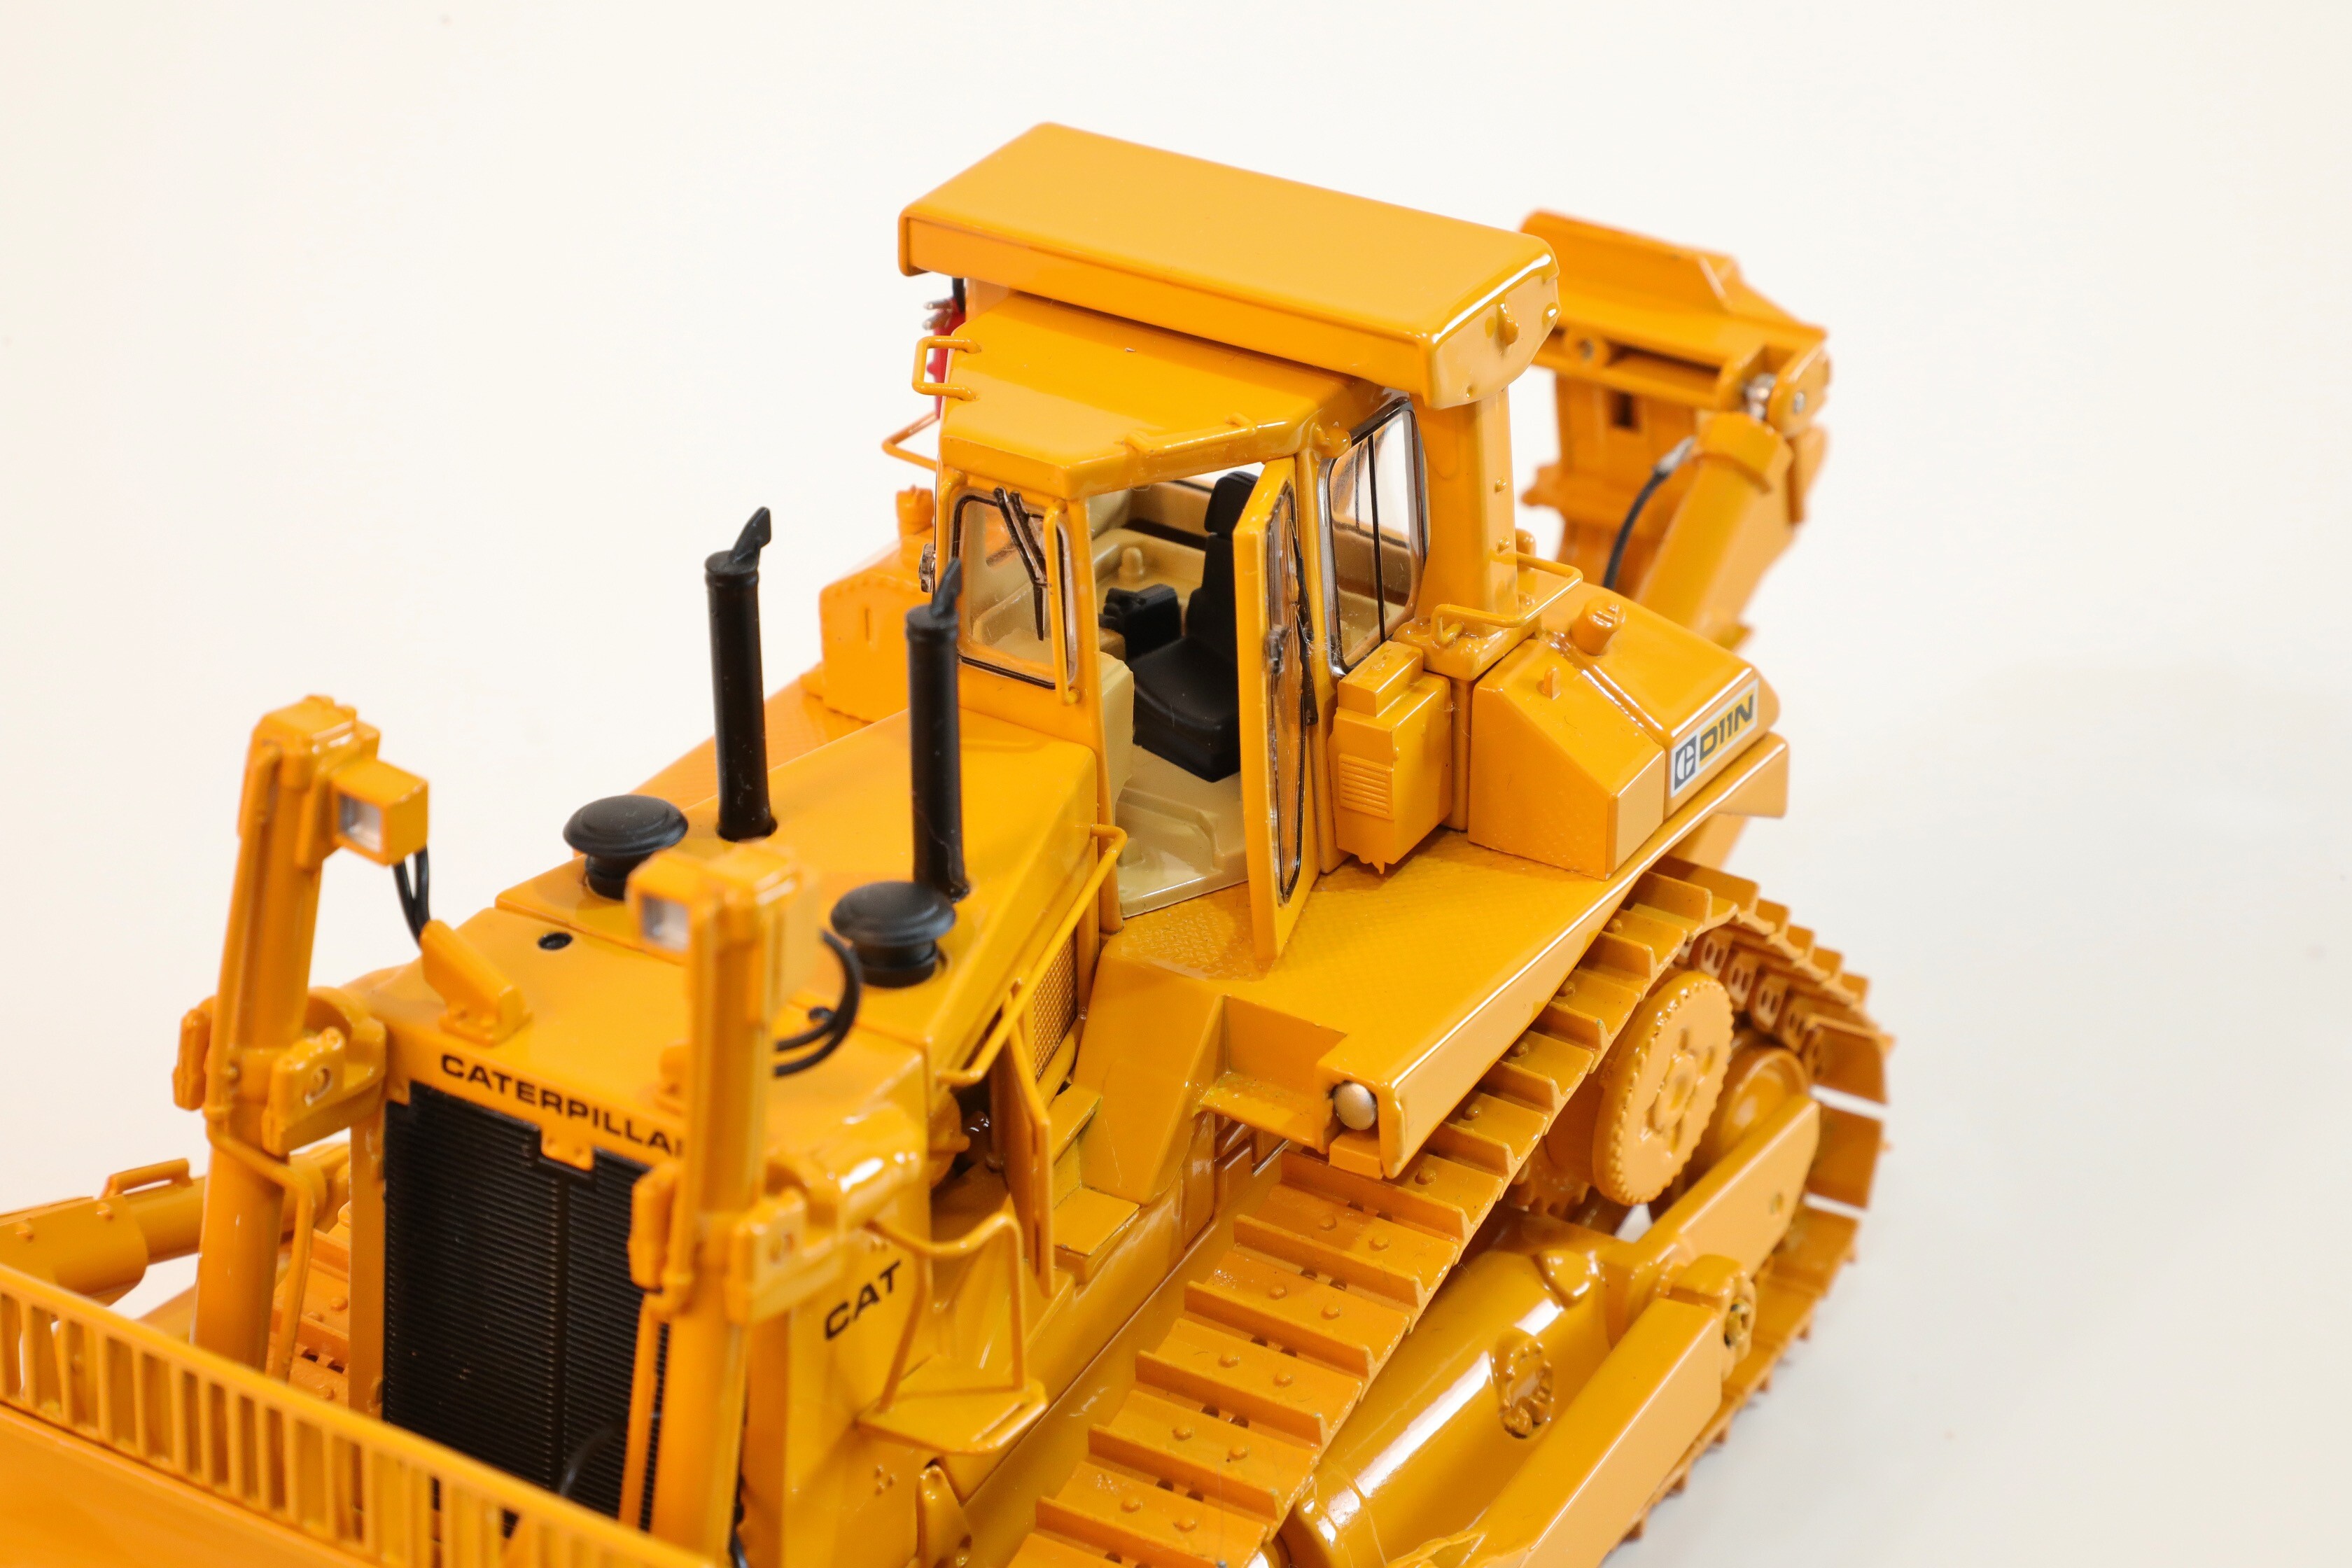 David Wylie reviews the 1:48th scale die-cast Caterpillar D11N